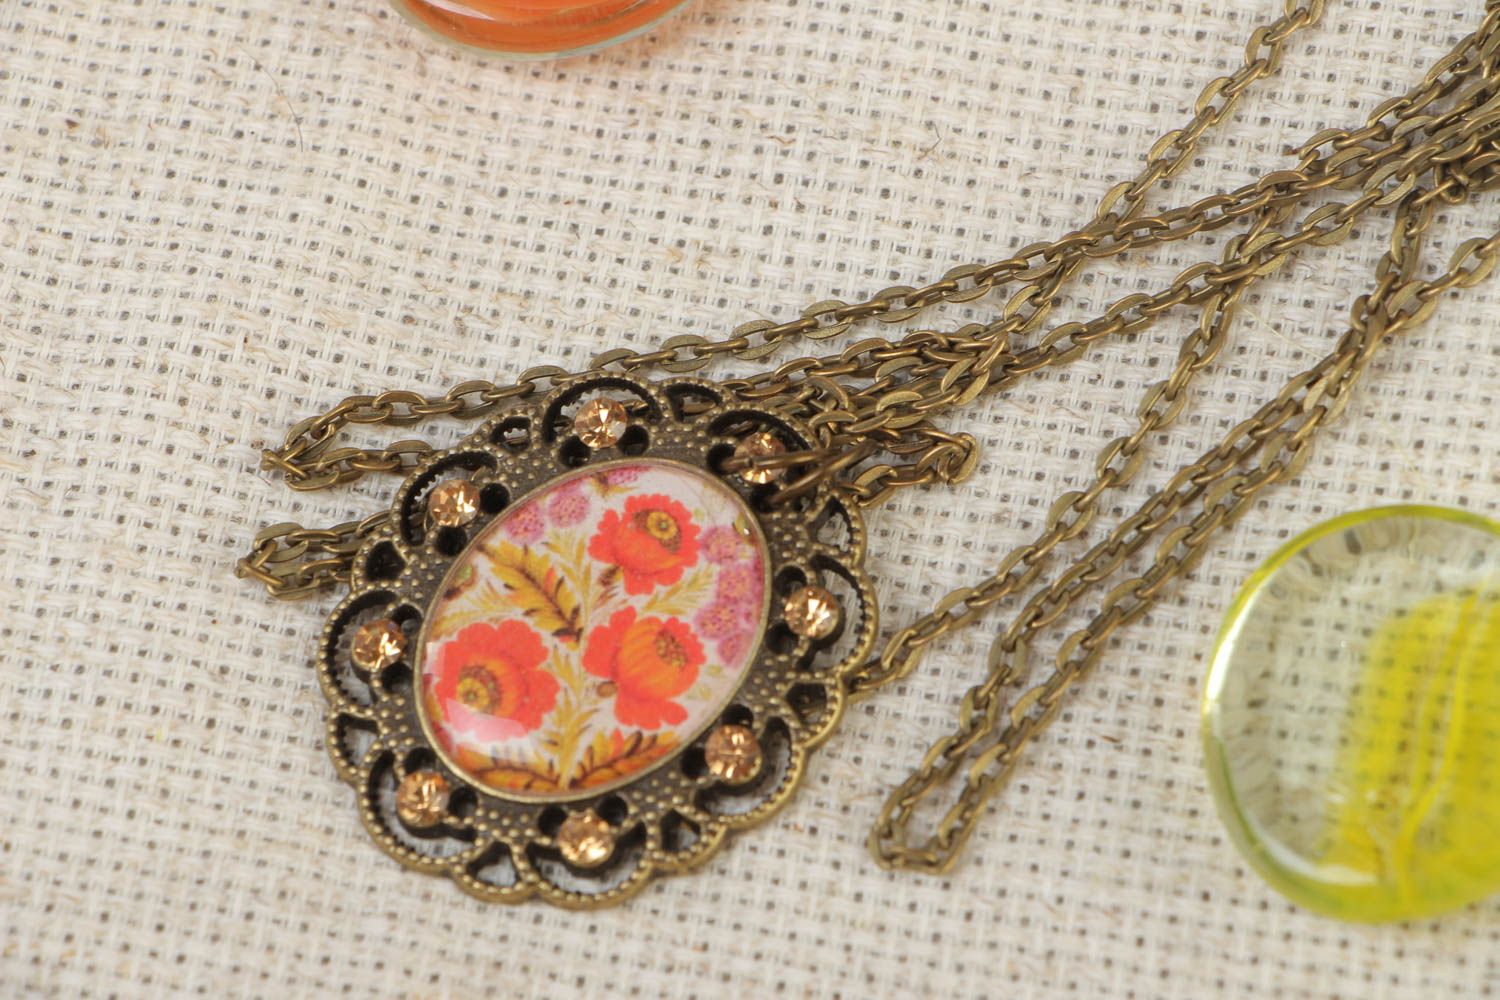 Handmade vintage metal pendant with floral image and glass glaze on chain 700 mm photo 1